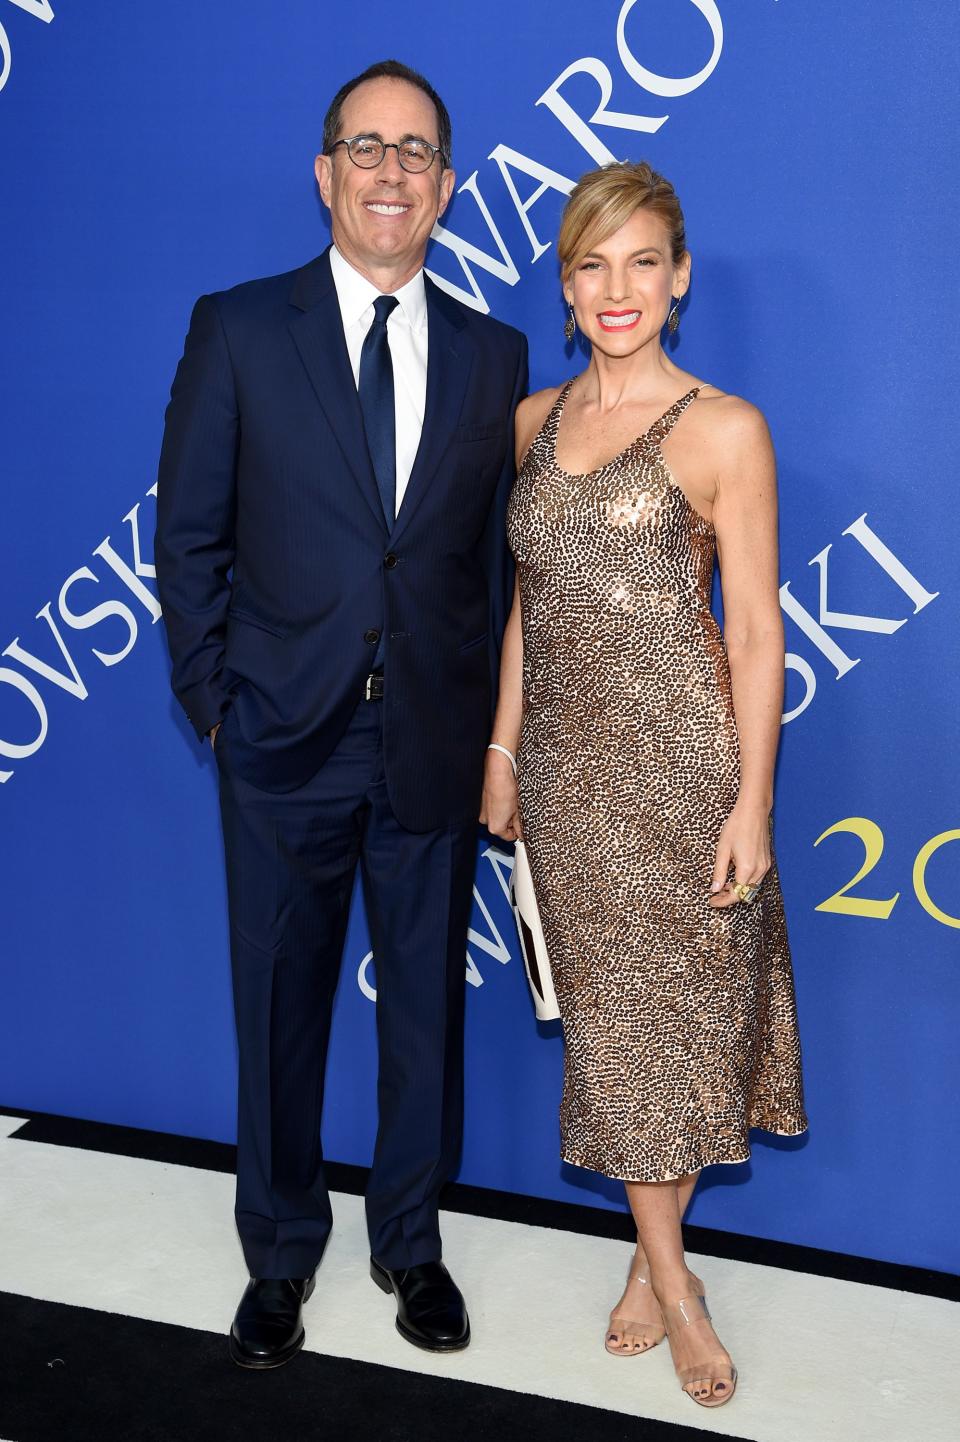 Jerry Seinfeld and Jessica Seinfeld in Narciso Rodriguez